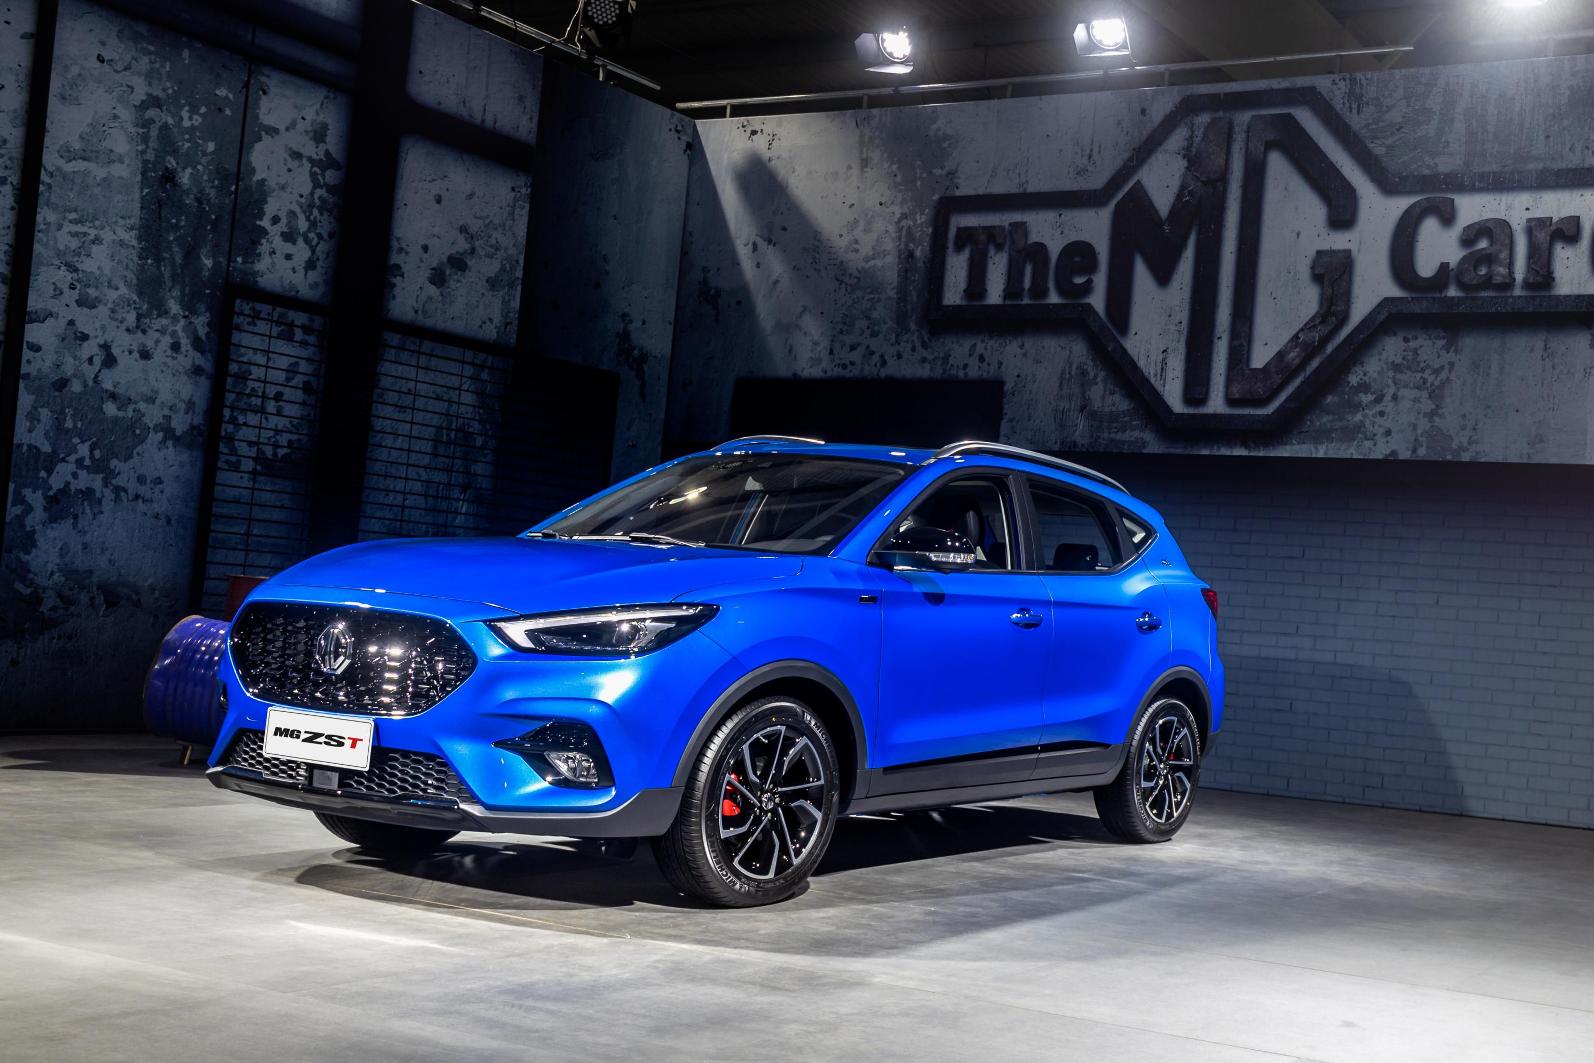 New MG ZST at the Heart of Enhanced Crossover Line-up From British-Born Car Brand